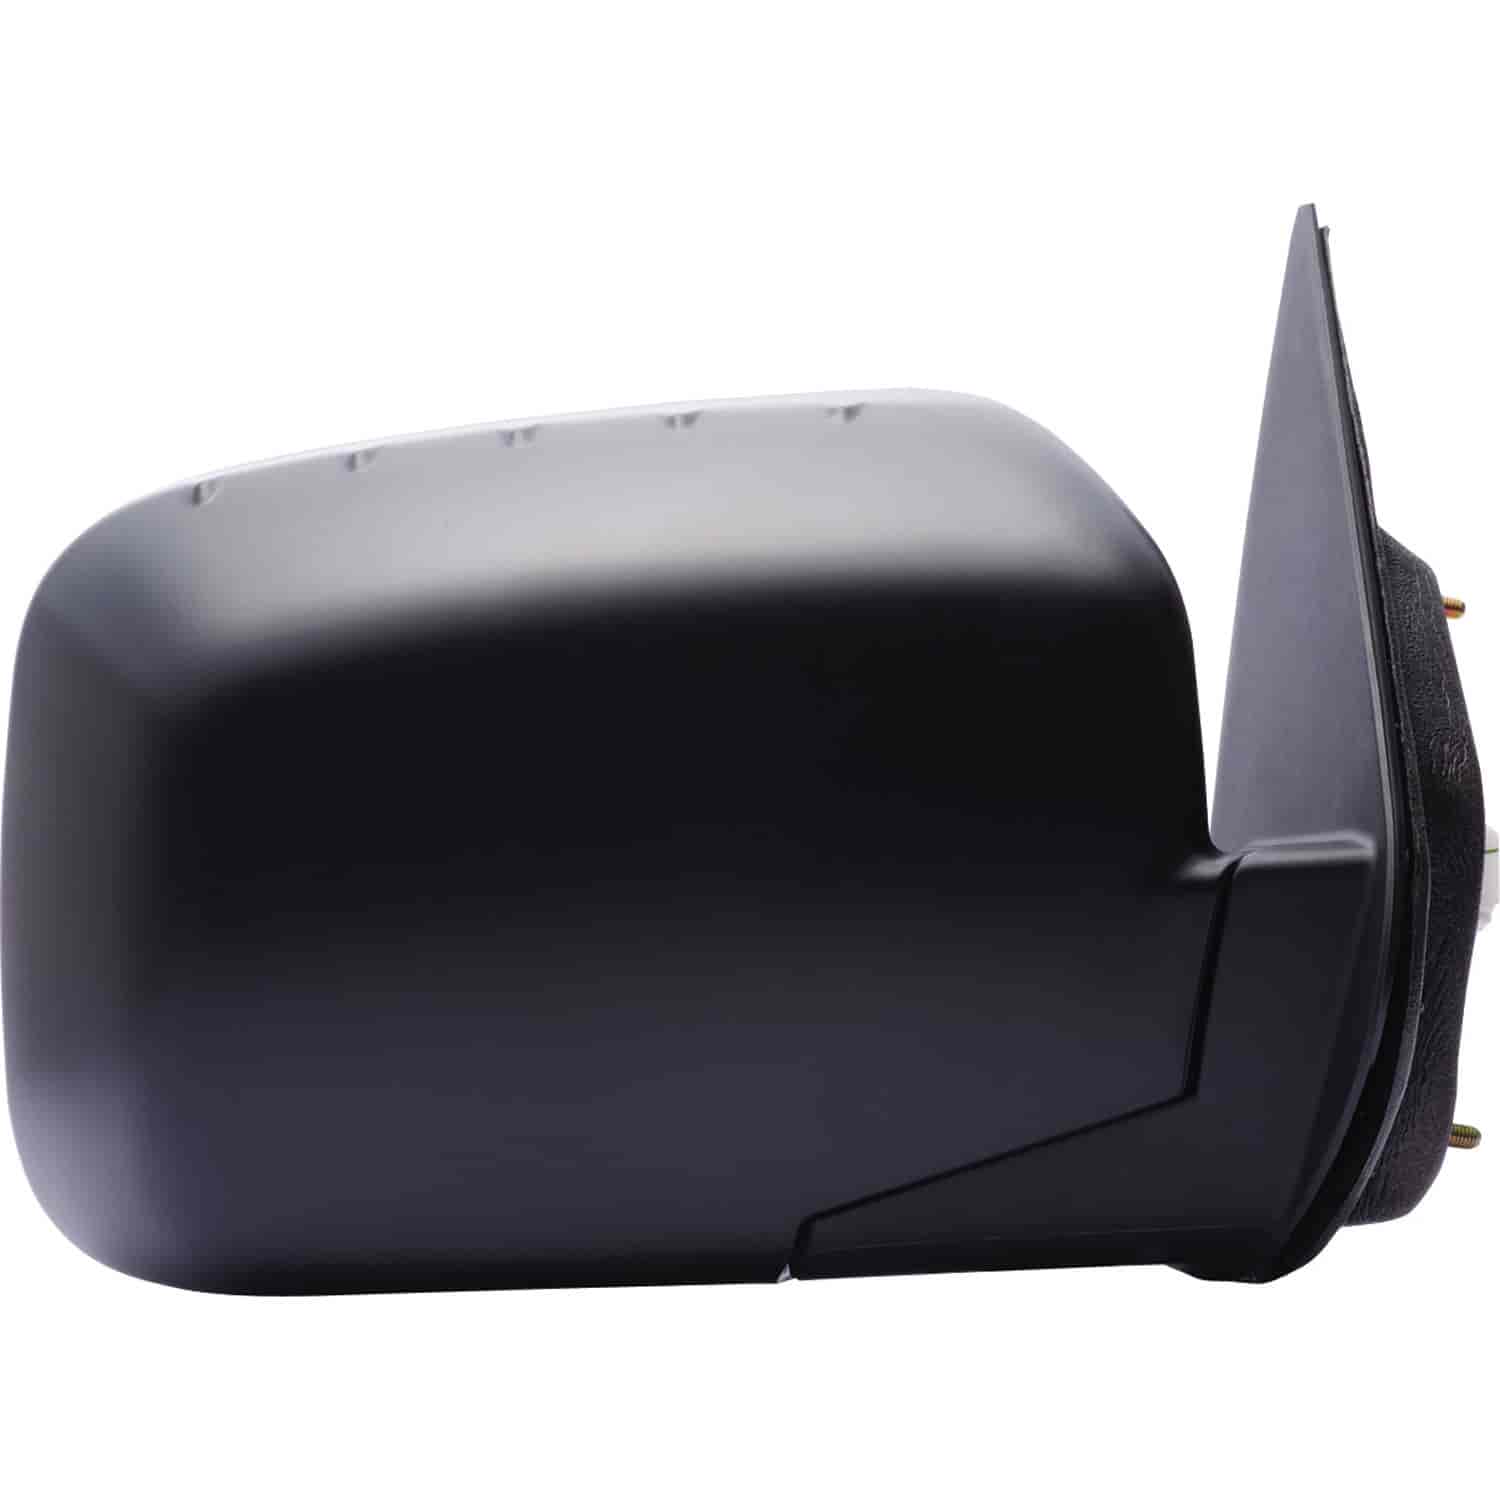 OEM Style Replacement mirror for 06-14 Honda Ridgeline passenger side mirror tested to fit and funct